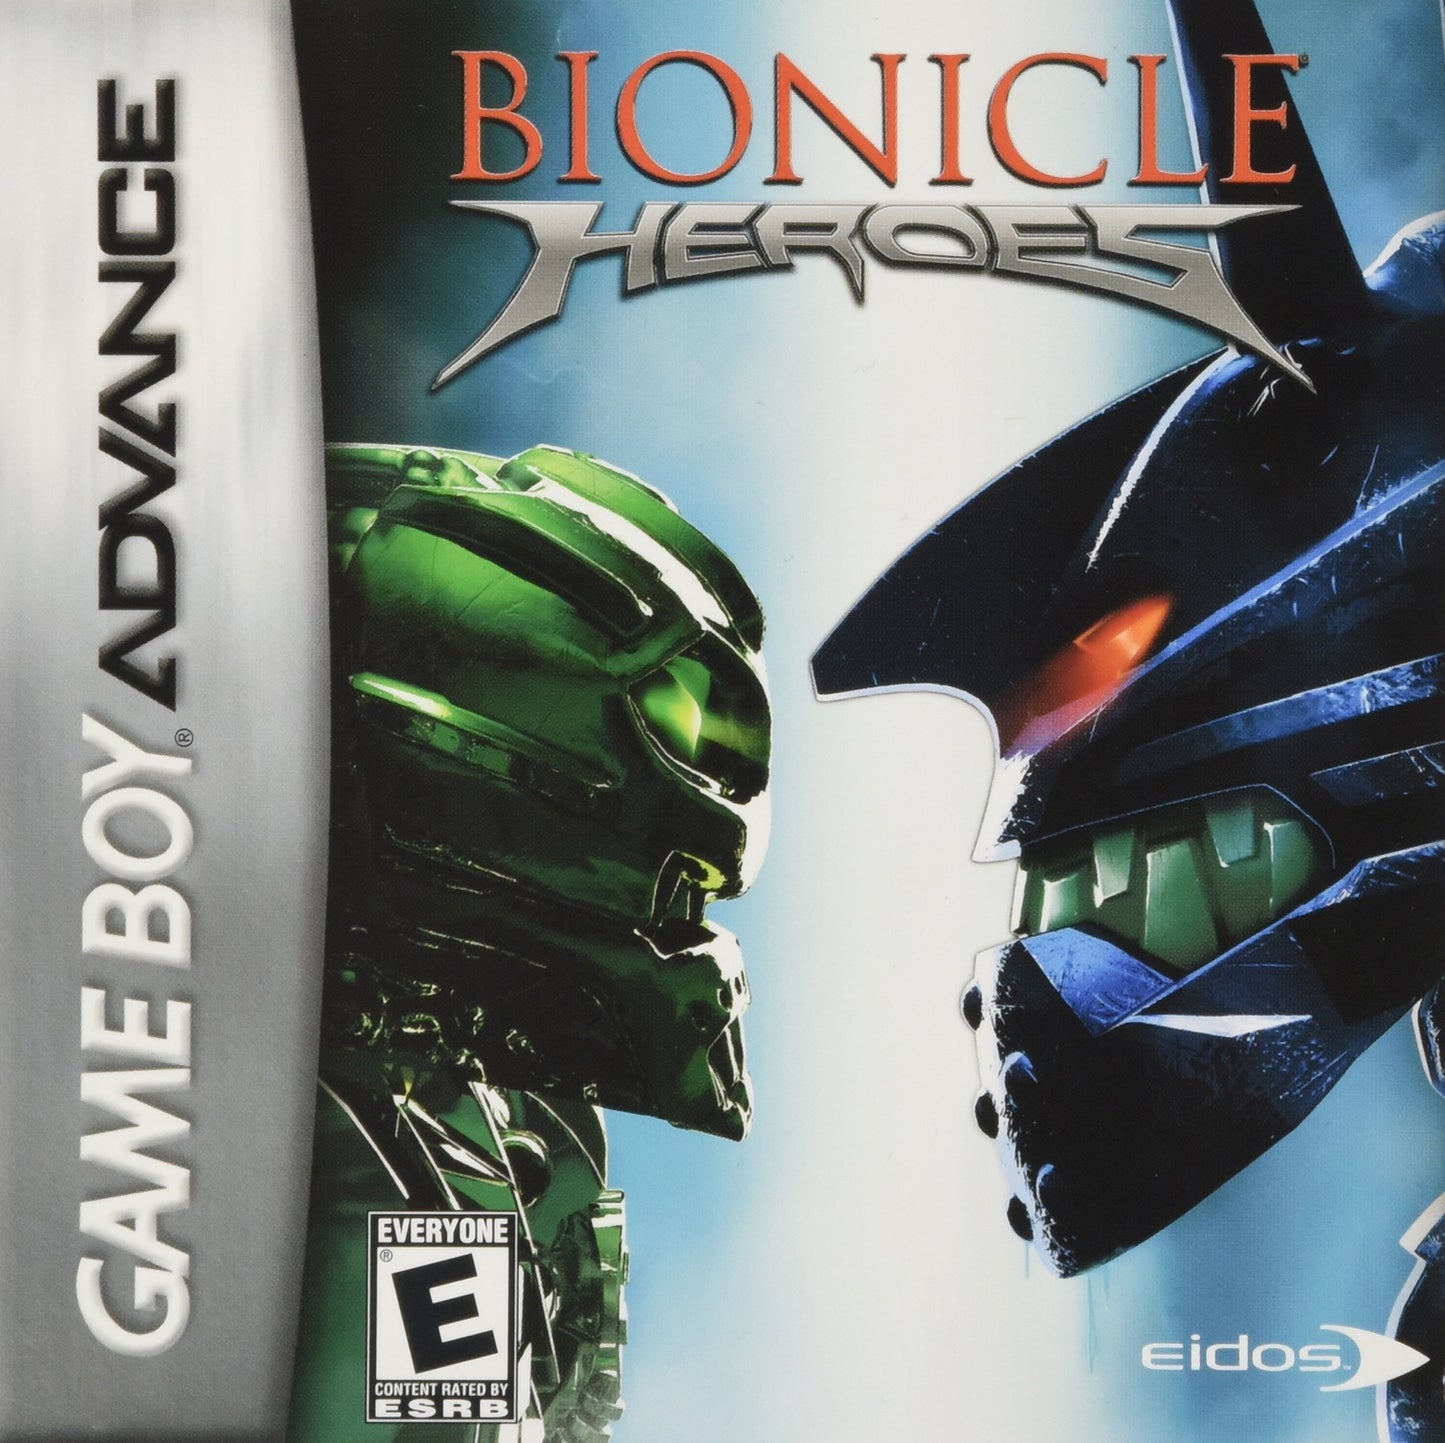 Héroes Bionicle (Gameboy Advance)